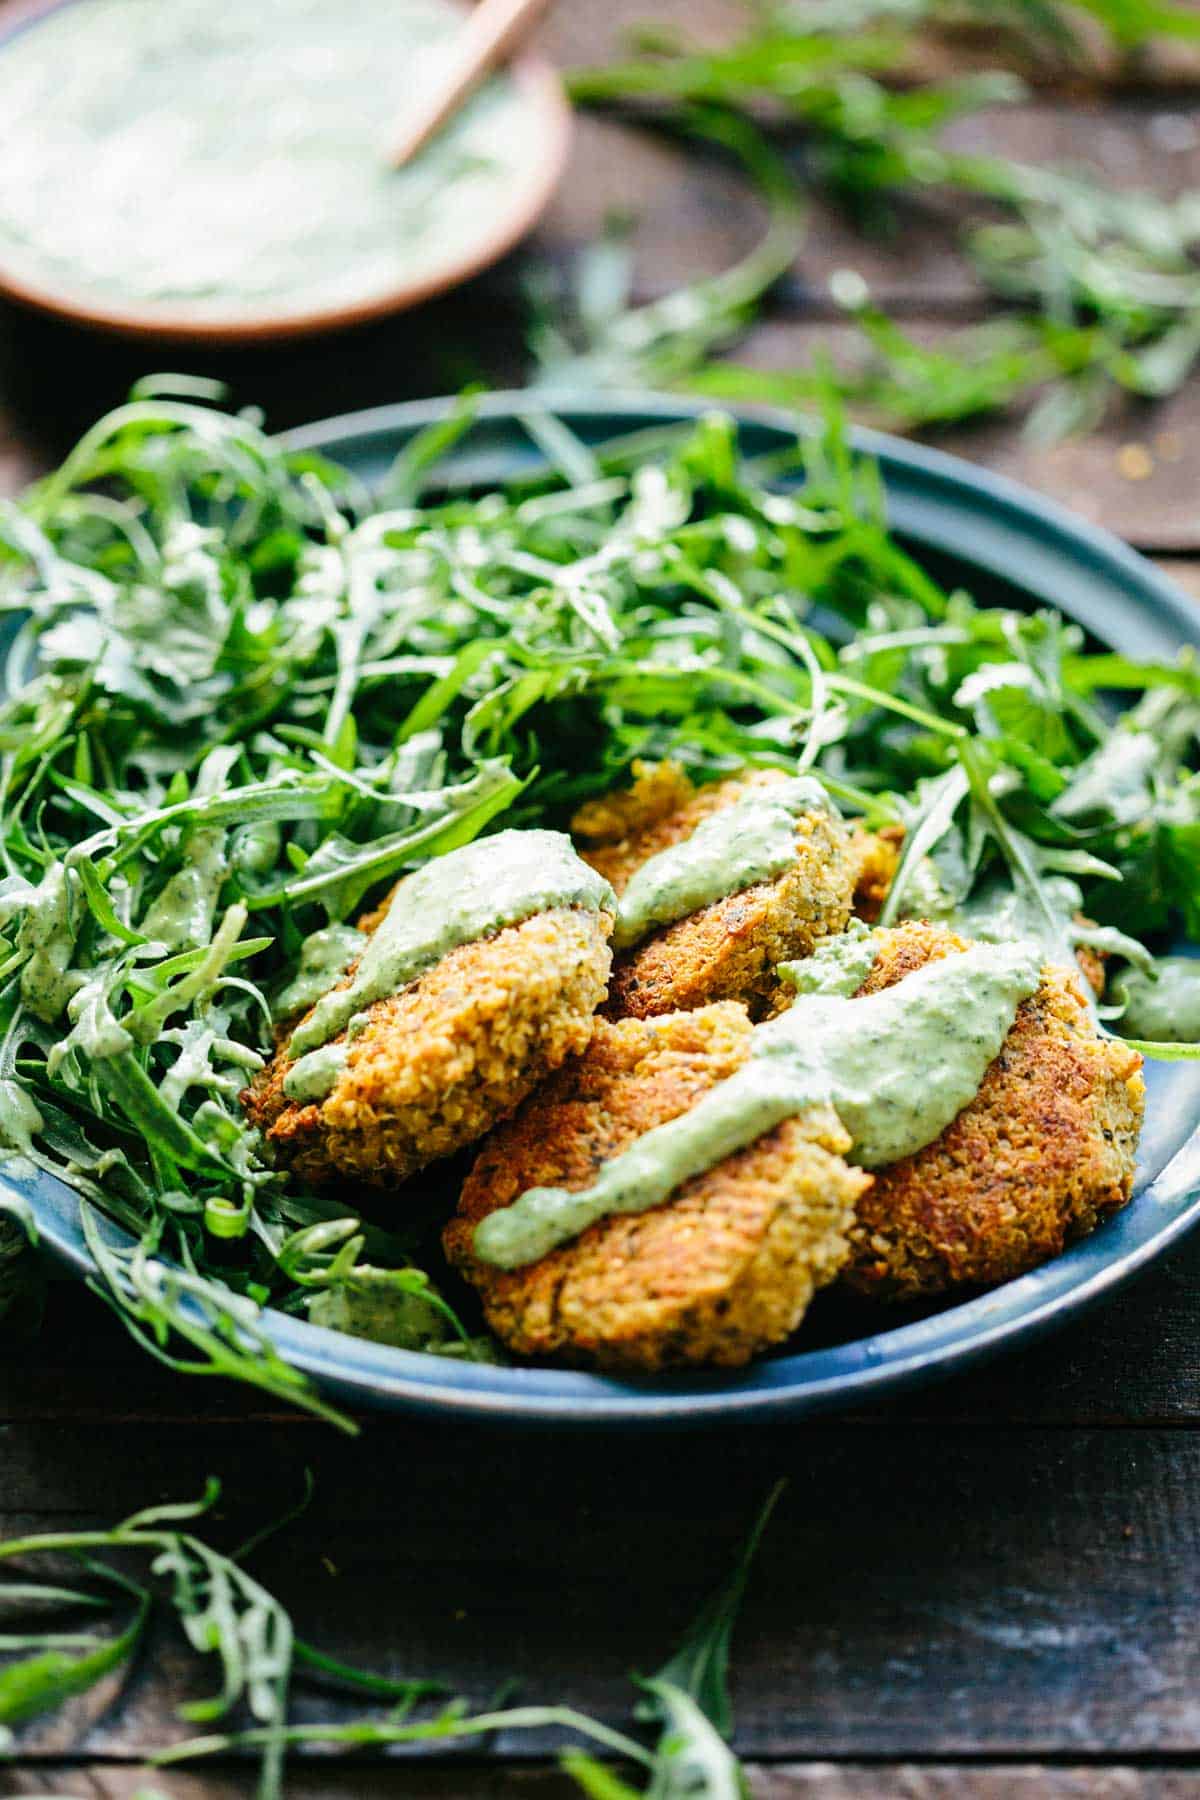 Plate filled with salad greens next to quinoa falafel drizzled with green tahini.